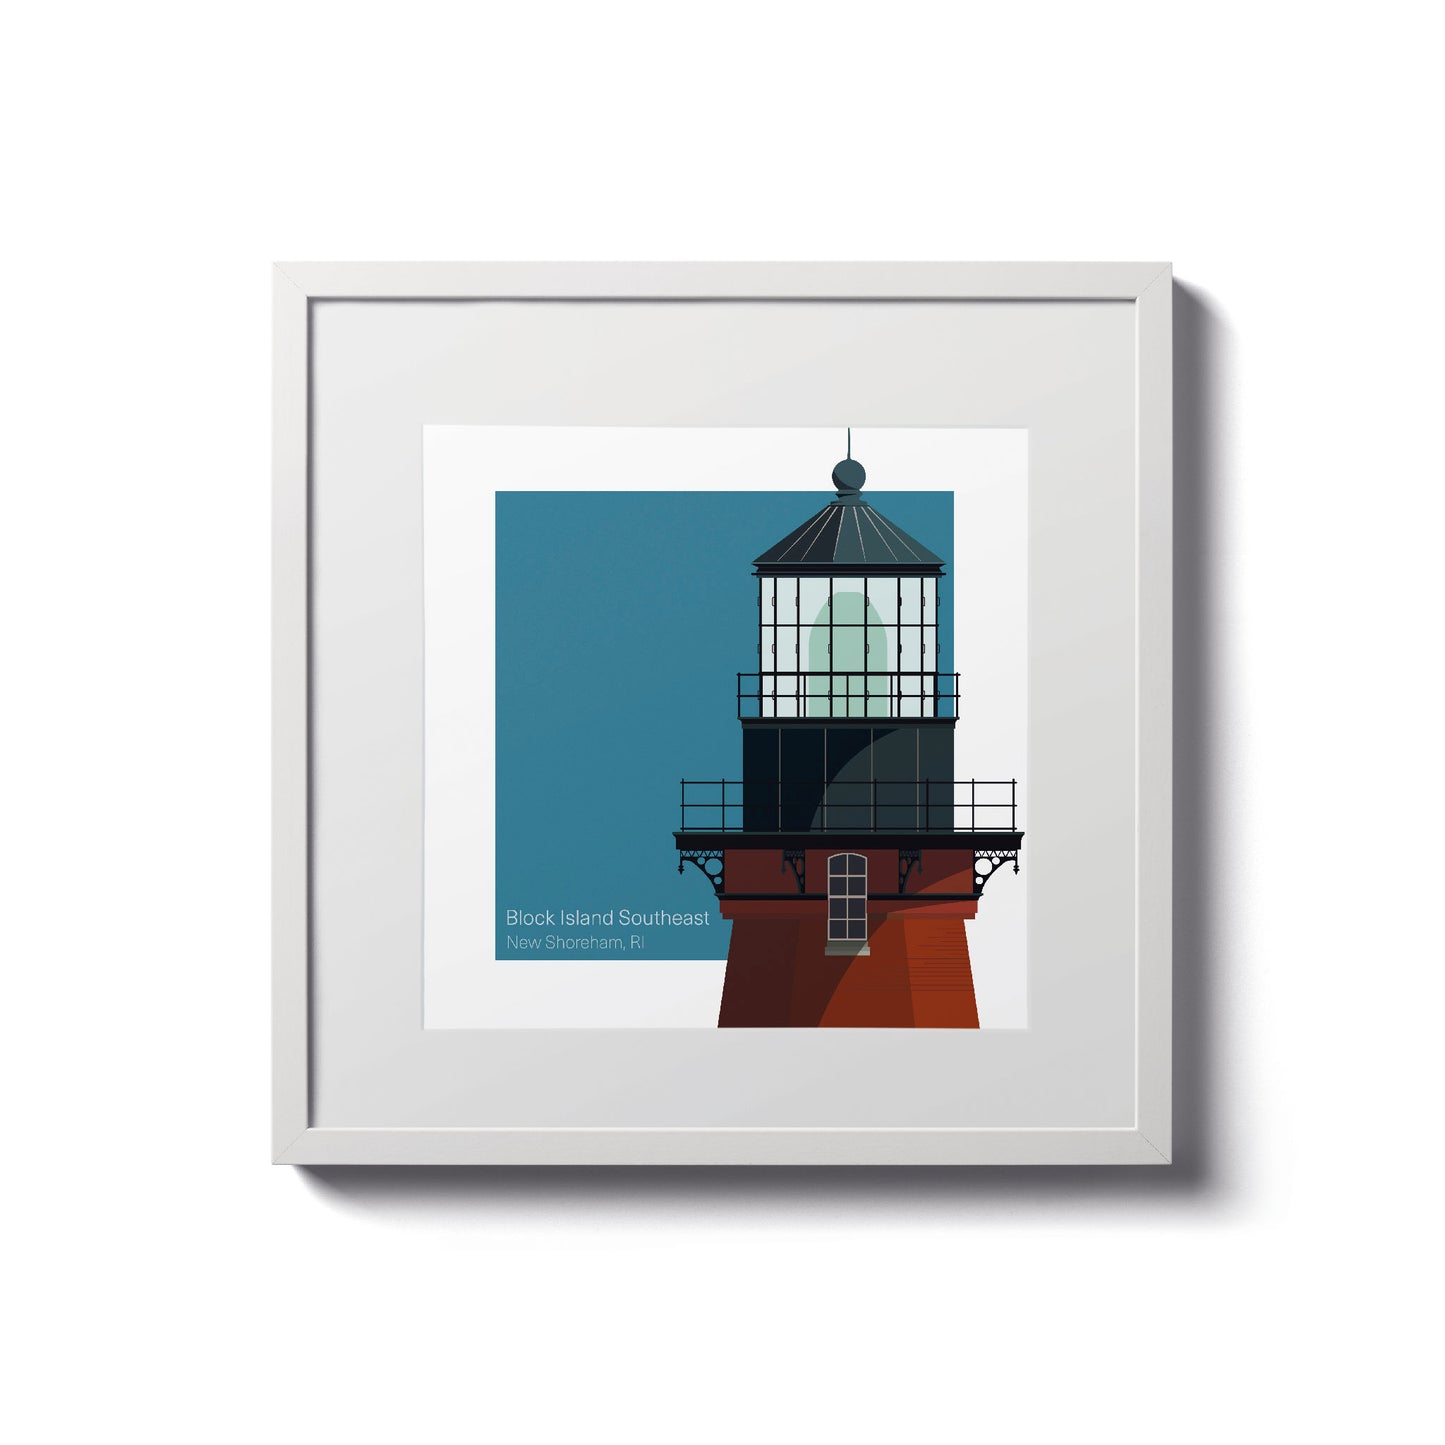 Illustration of the Block Island Southeast lighthouse, RI, USA. On a white background with aqua blue square as a backdrop., in a white frame  and measuring 8"x8" (20x20cm).